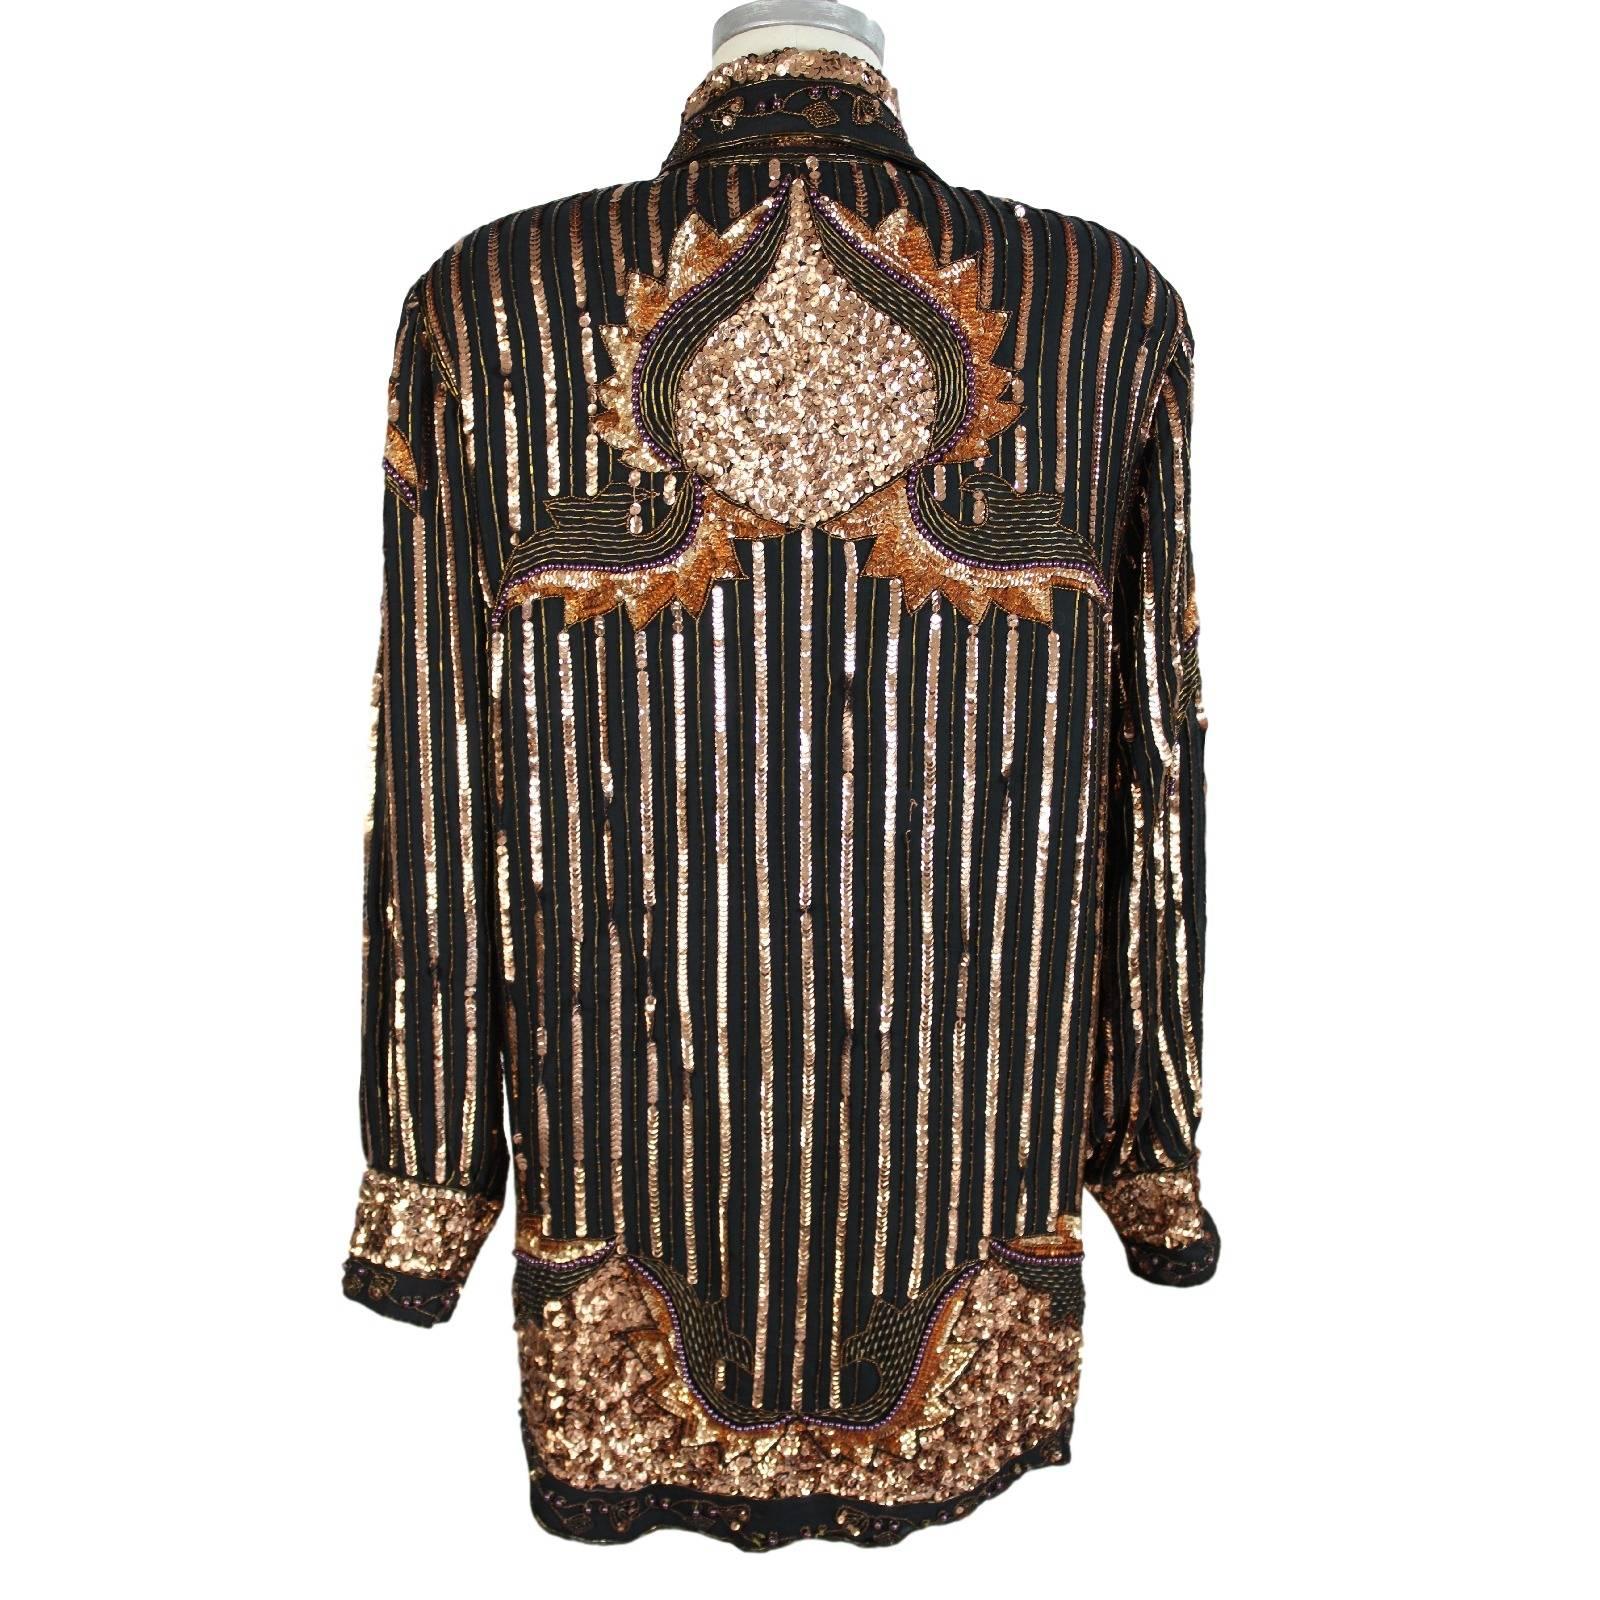 1980s Artisanal Italian Bronze Paillettes Sequins Blouse Shirt In Excellent Condition For Sale In Brindisi, IT